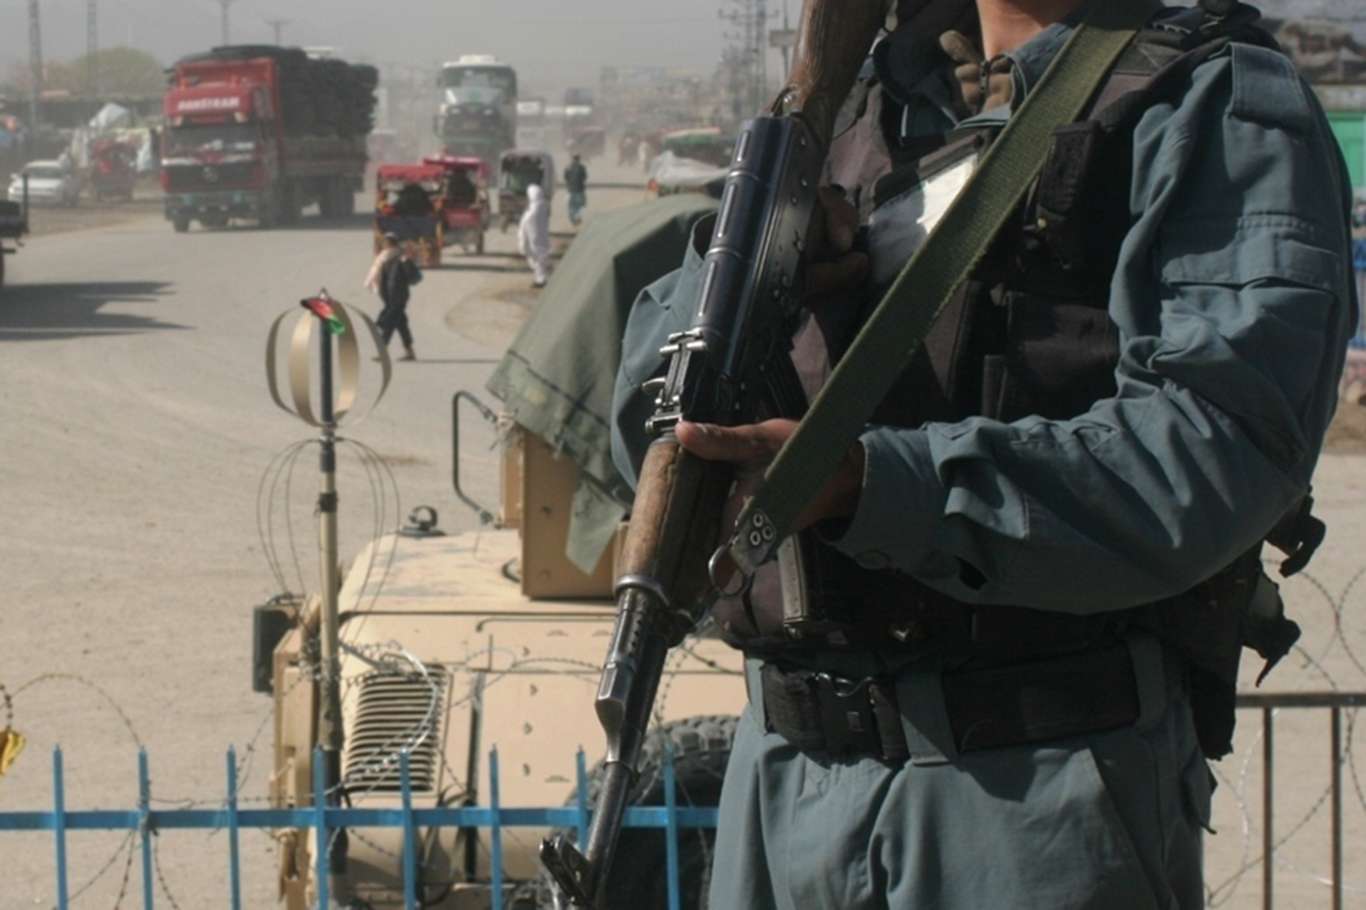 7 civilians killed in a roadside bomb attack in Afghanistan